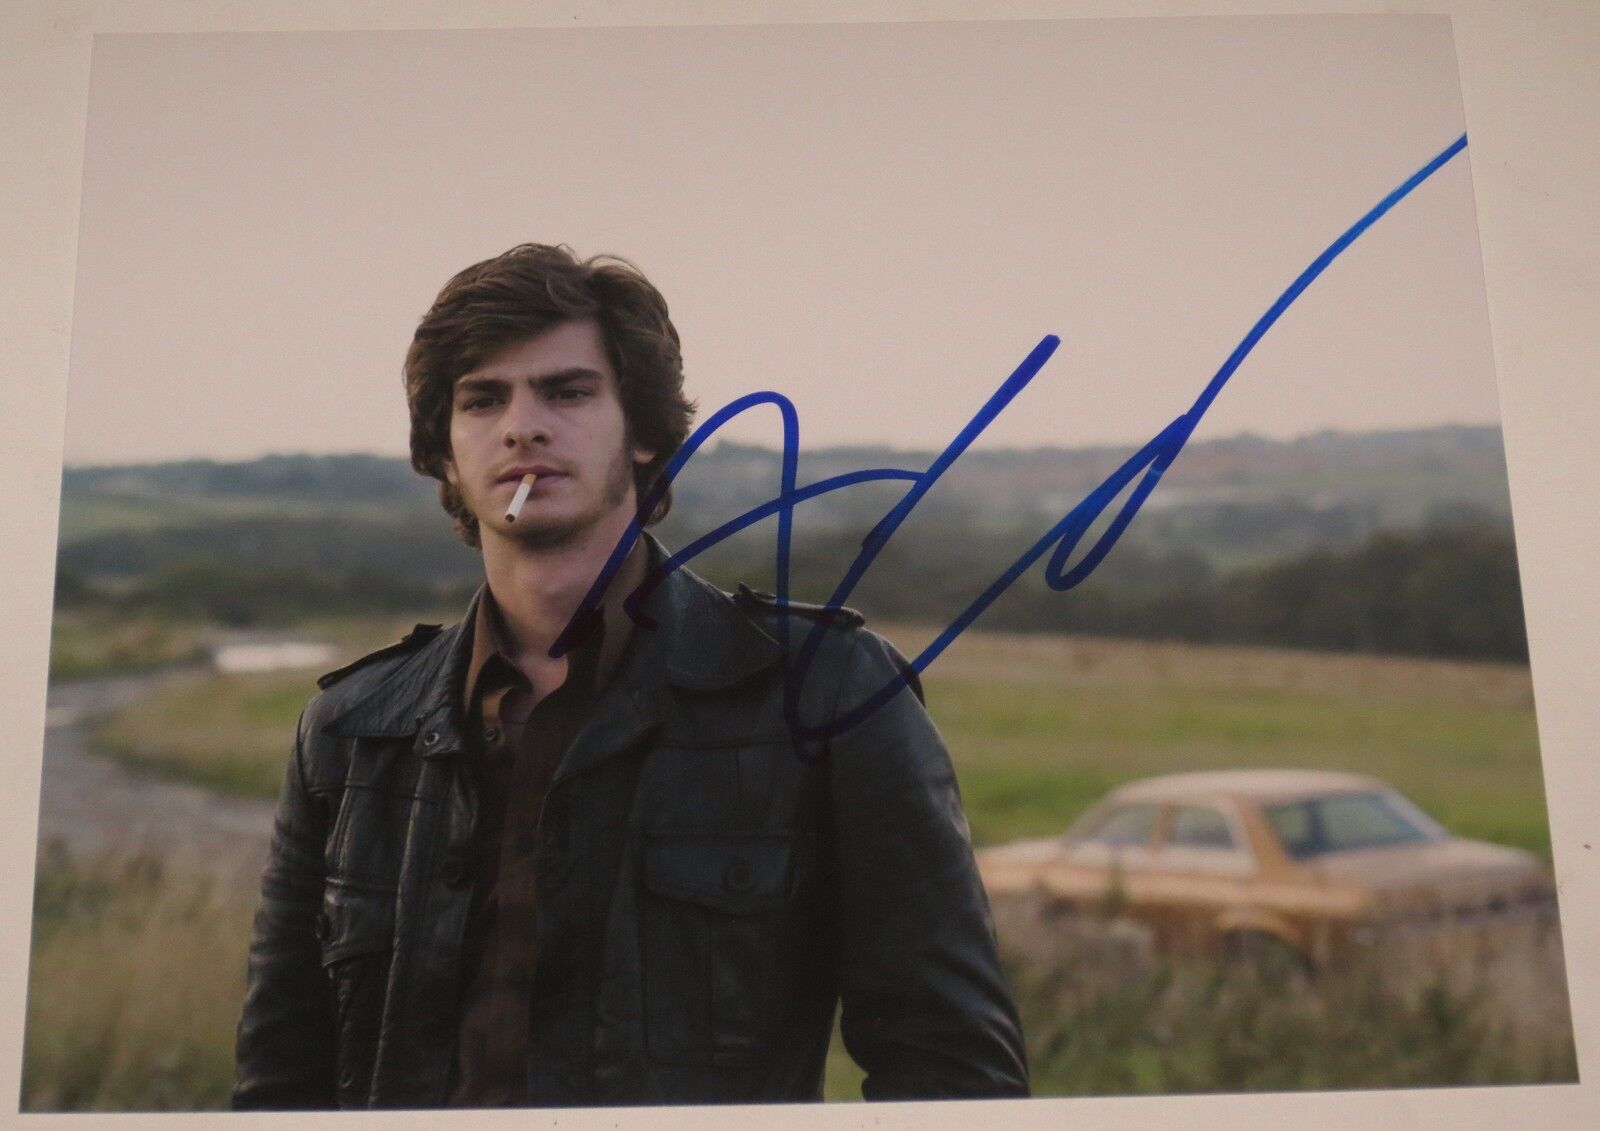 SPIDERMAN STAR ANDREW GARFIELD SIGNED 8X10 PHOTO AUTOGRAPH SOCIAL NETWORK COA A